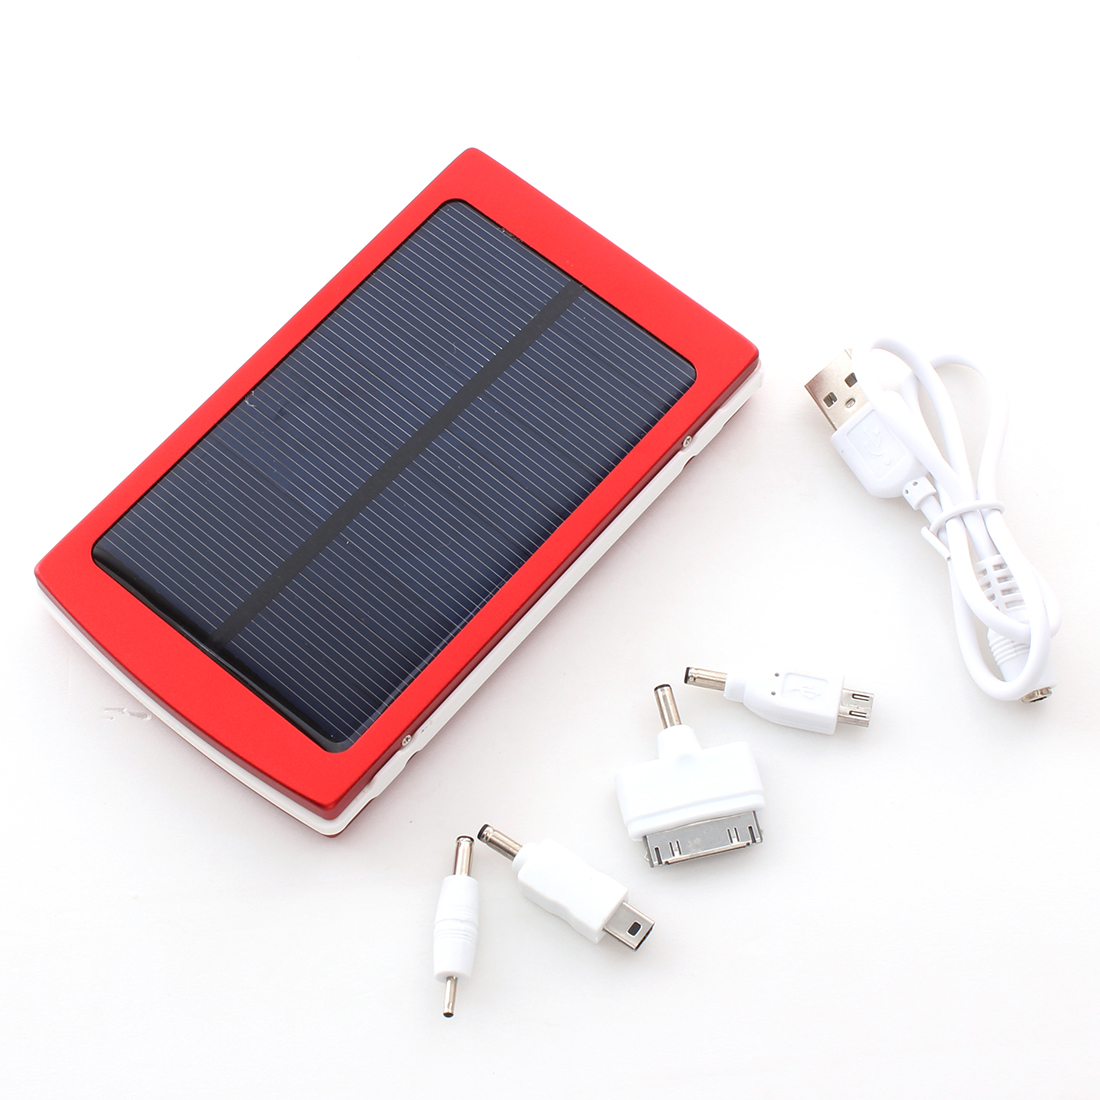 Solar-Charger-Mobile-Phone-Cell-Phone-Power-Bank-Charger-for-Camping-Hiking-Travel-955194-8